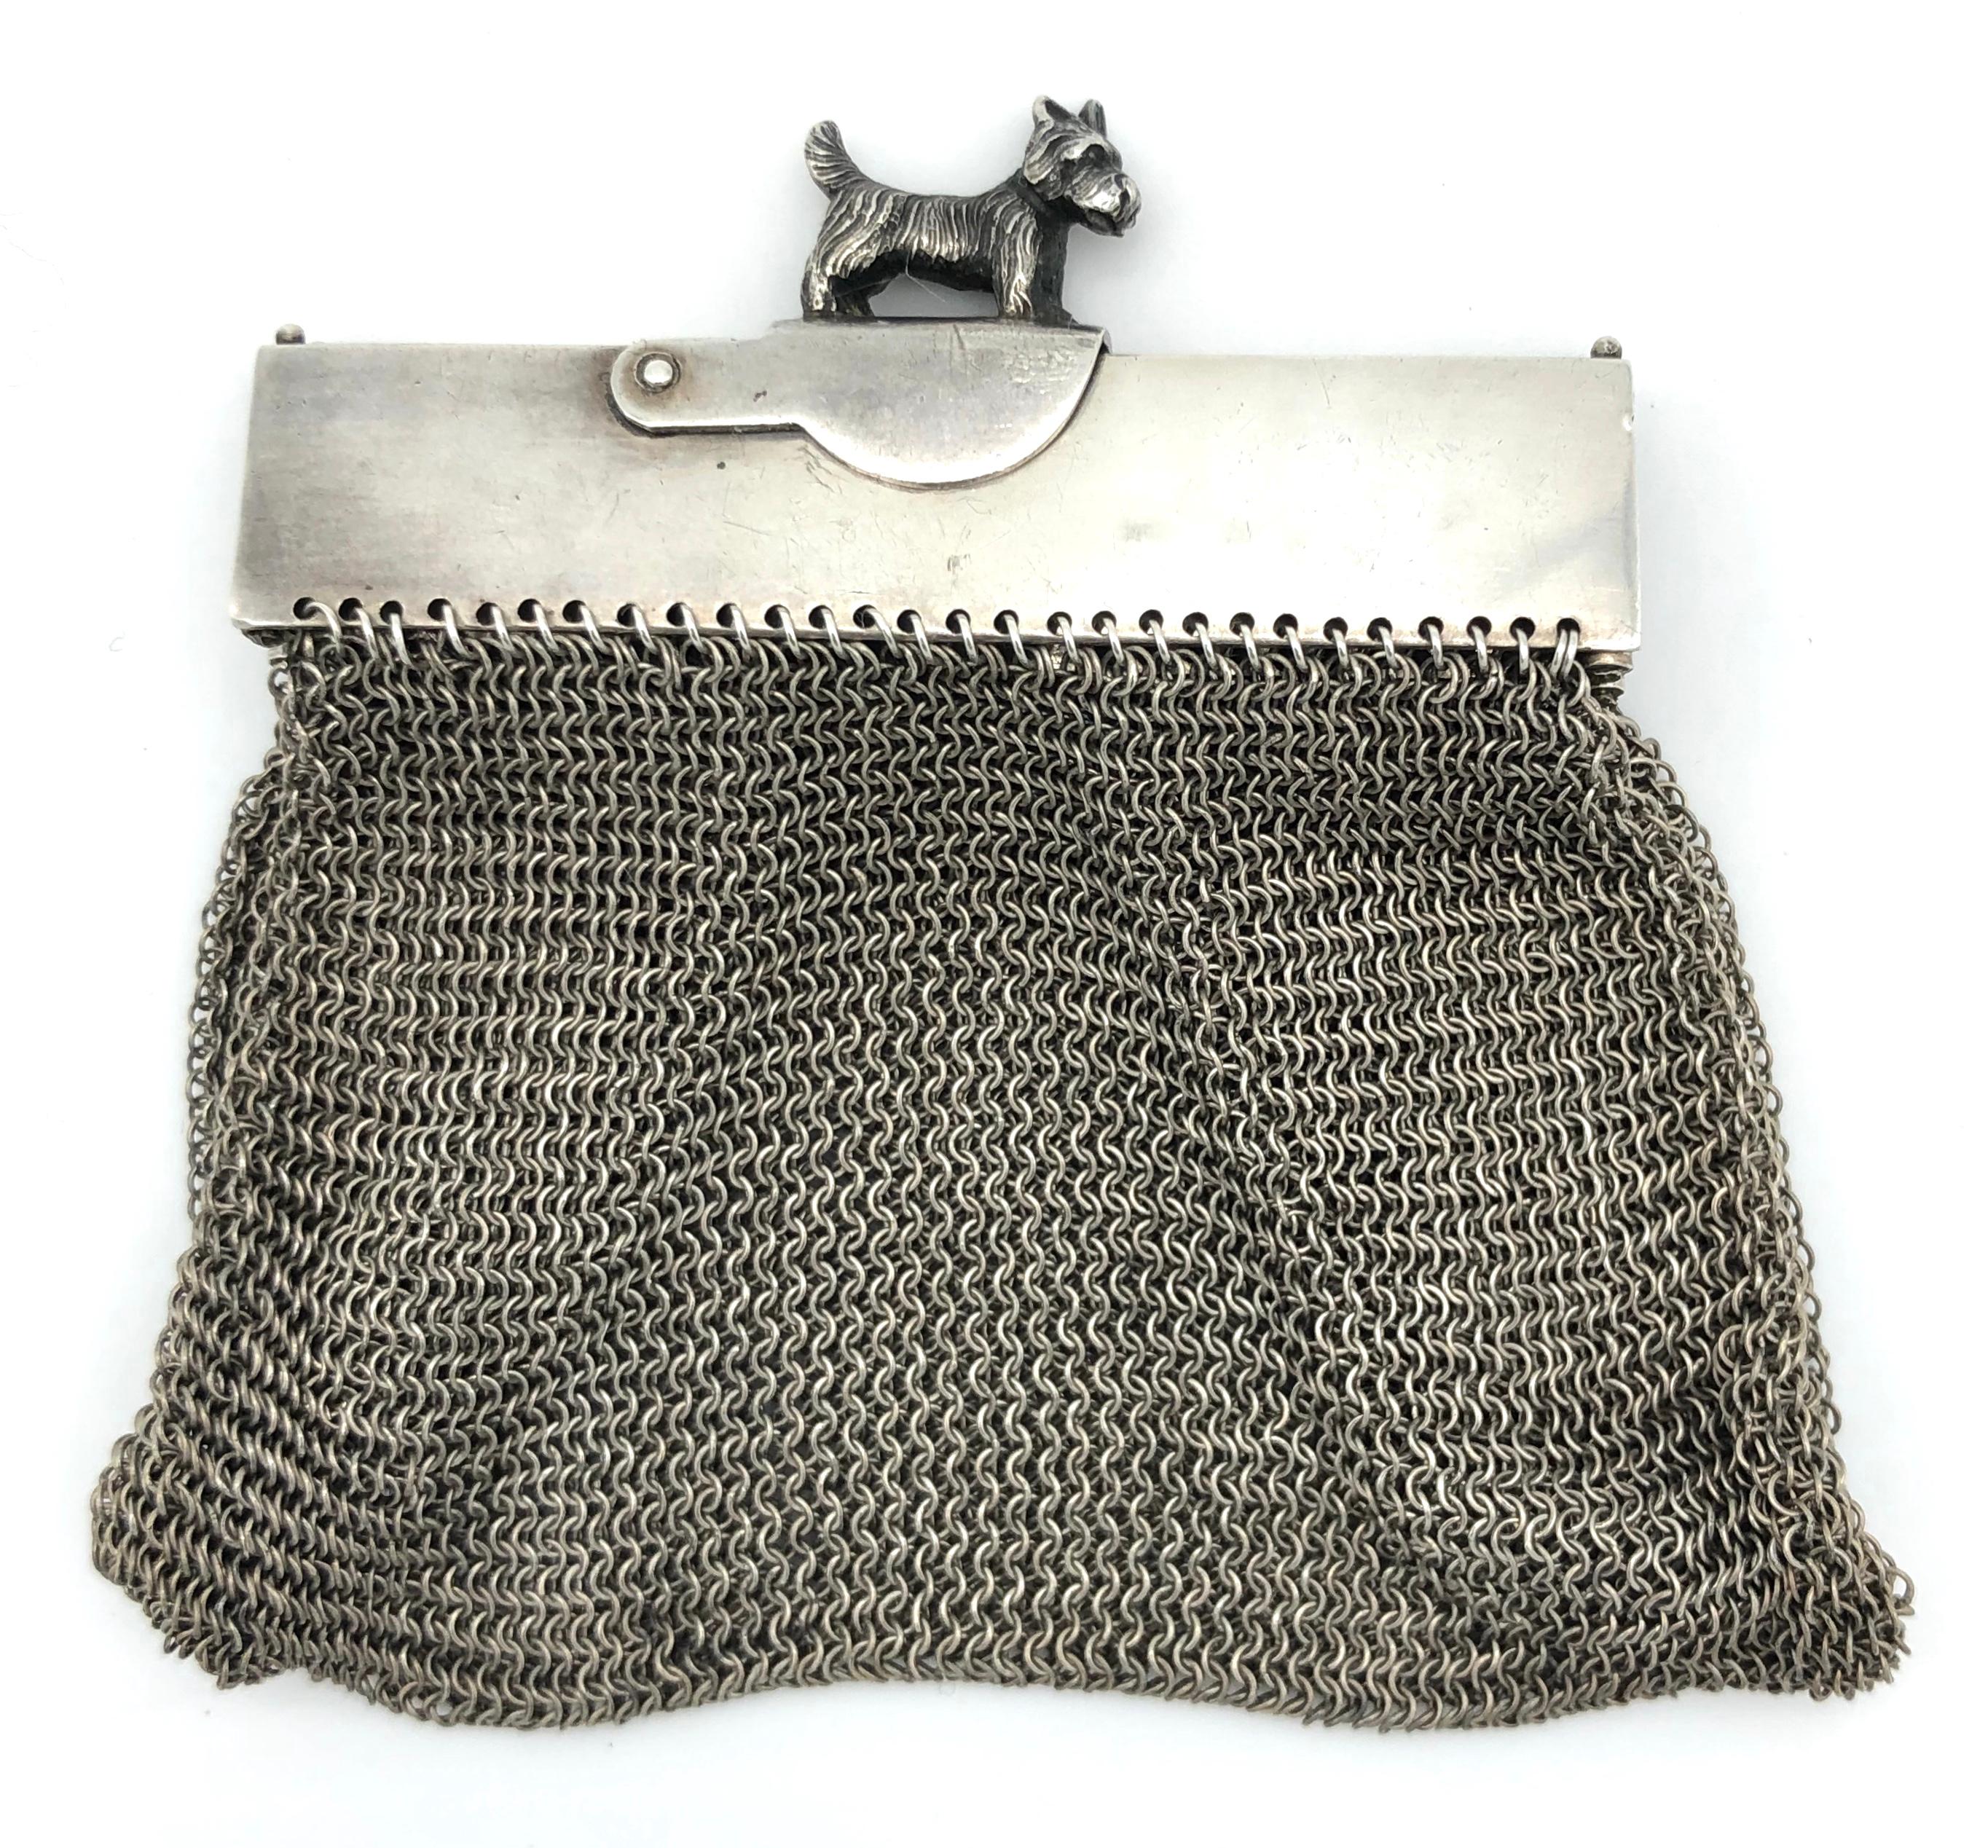 This absolutely adorable highly unusual delicate silver mesh purse has a fully modelled scottish terrier as a fastener. It can be attached to a silverchain or longgard. The purse stays open by means of foldable hinged silver arms. It has an